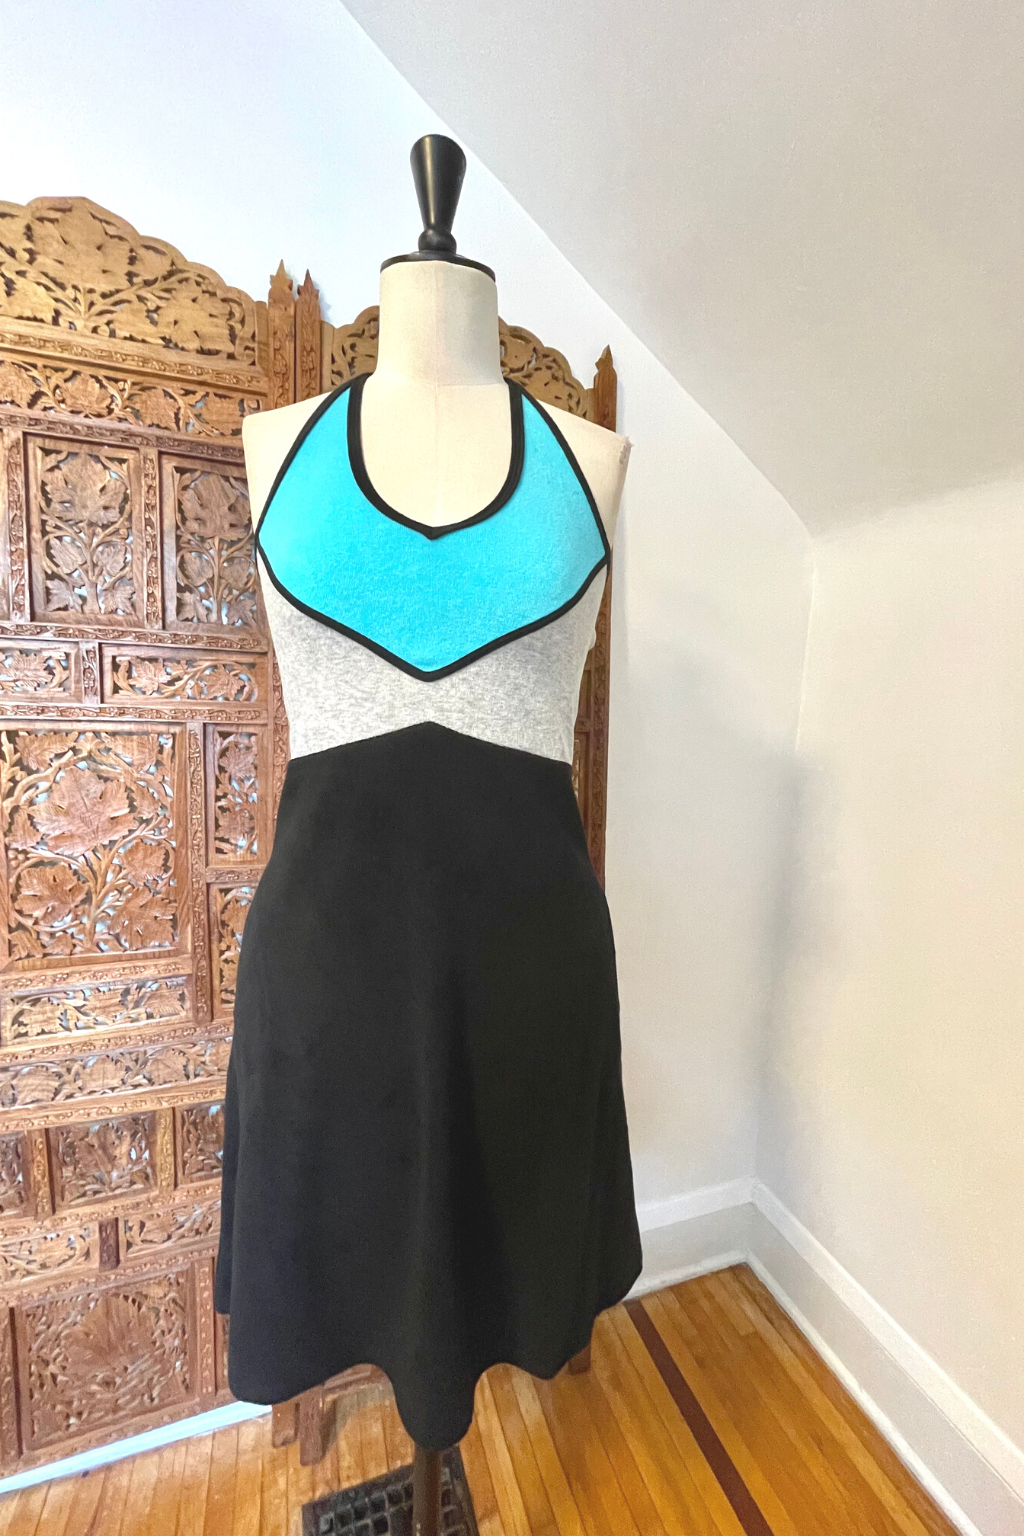 KOKOON Very Terry 3 color Halter Dress With Pockets in Aqua Heather Grey and Black Loop Terry Cloth Front on Mannequin